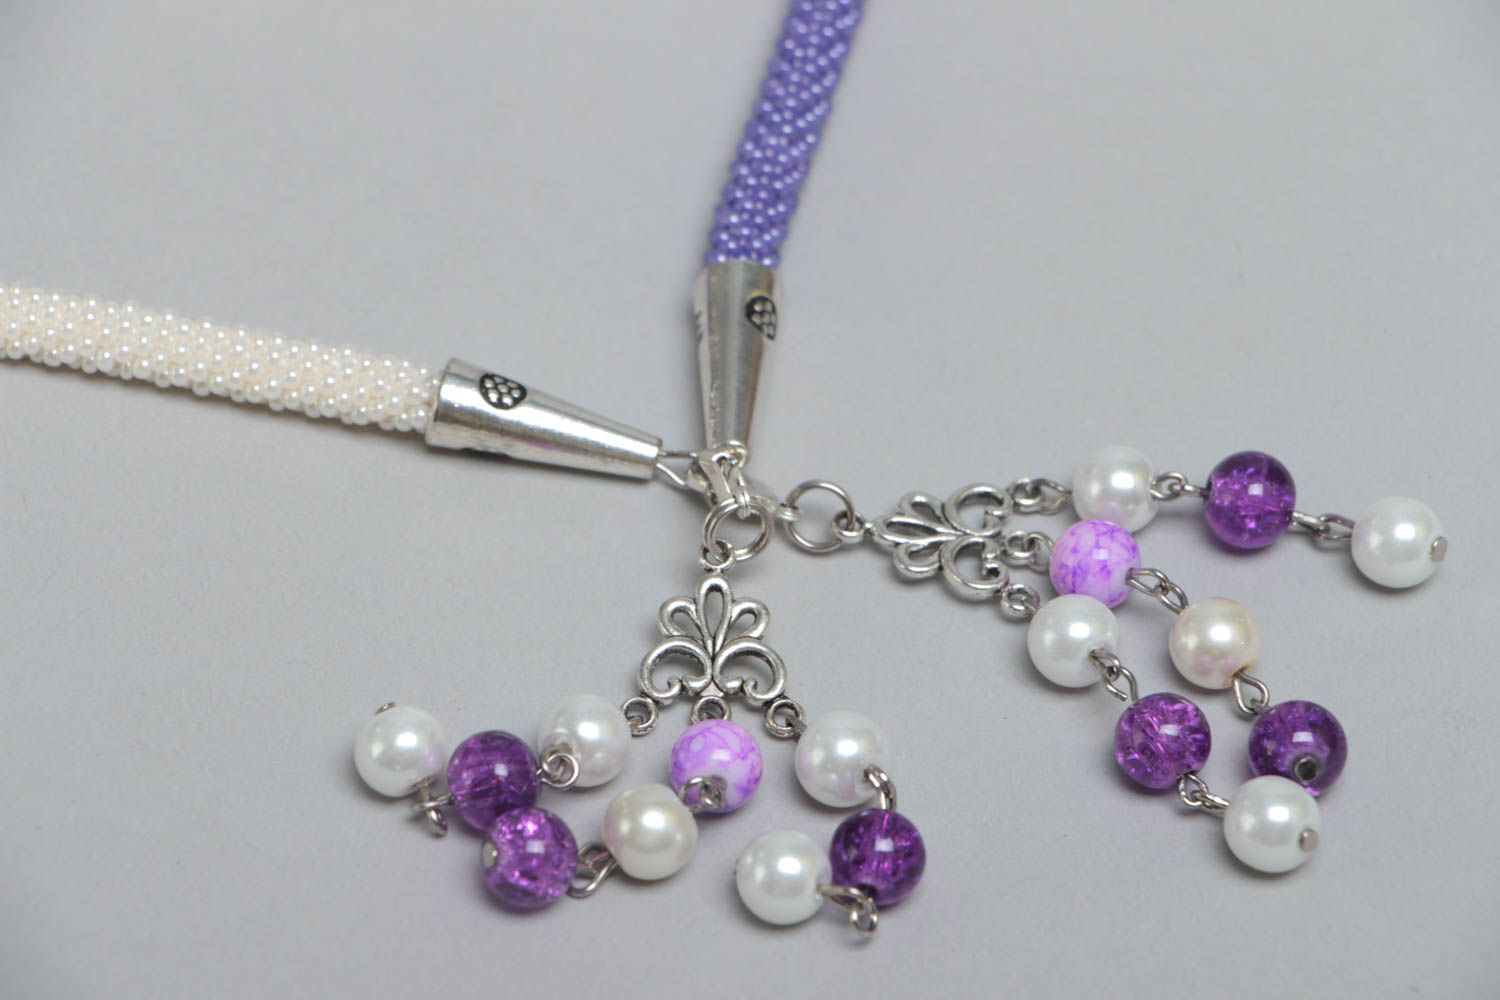 Lilac and white handmade braided beaded lariat necklace designer jewelry photo 4